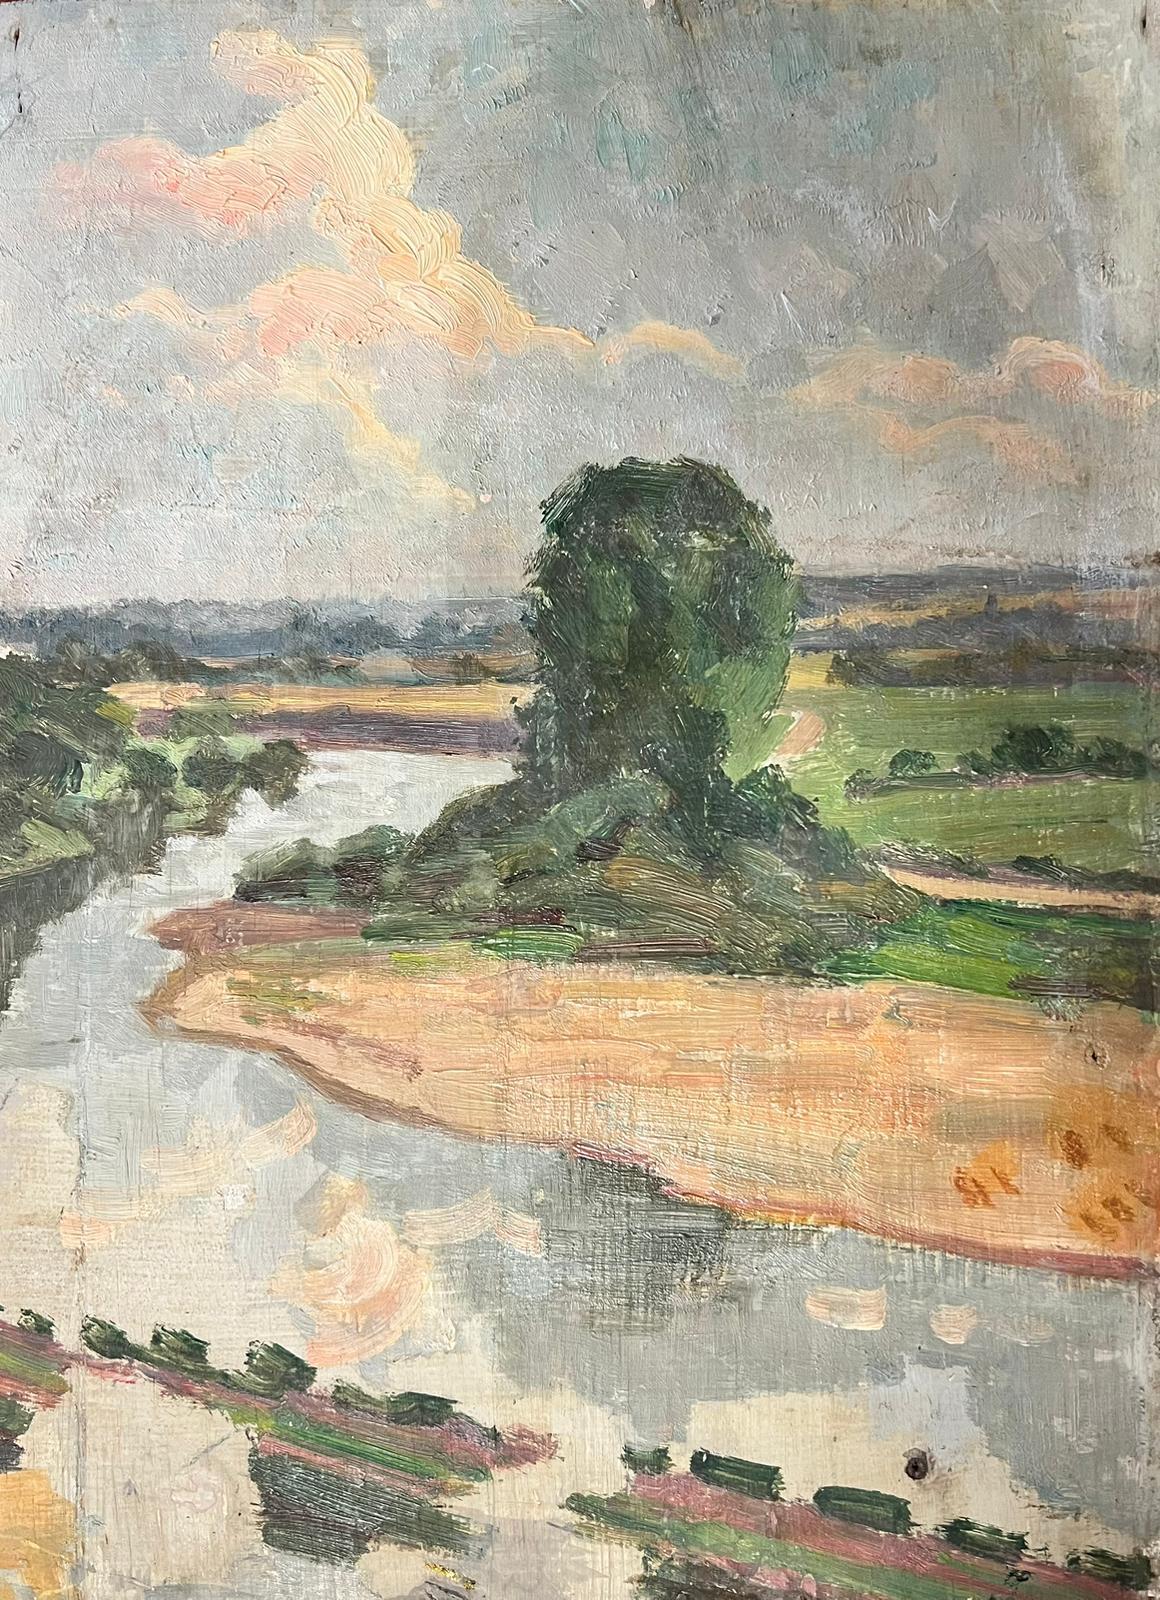 1930's French Post Impressionist Oil Painting Winding River Landscape Sketch